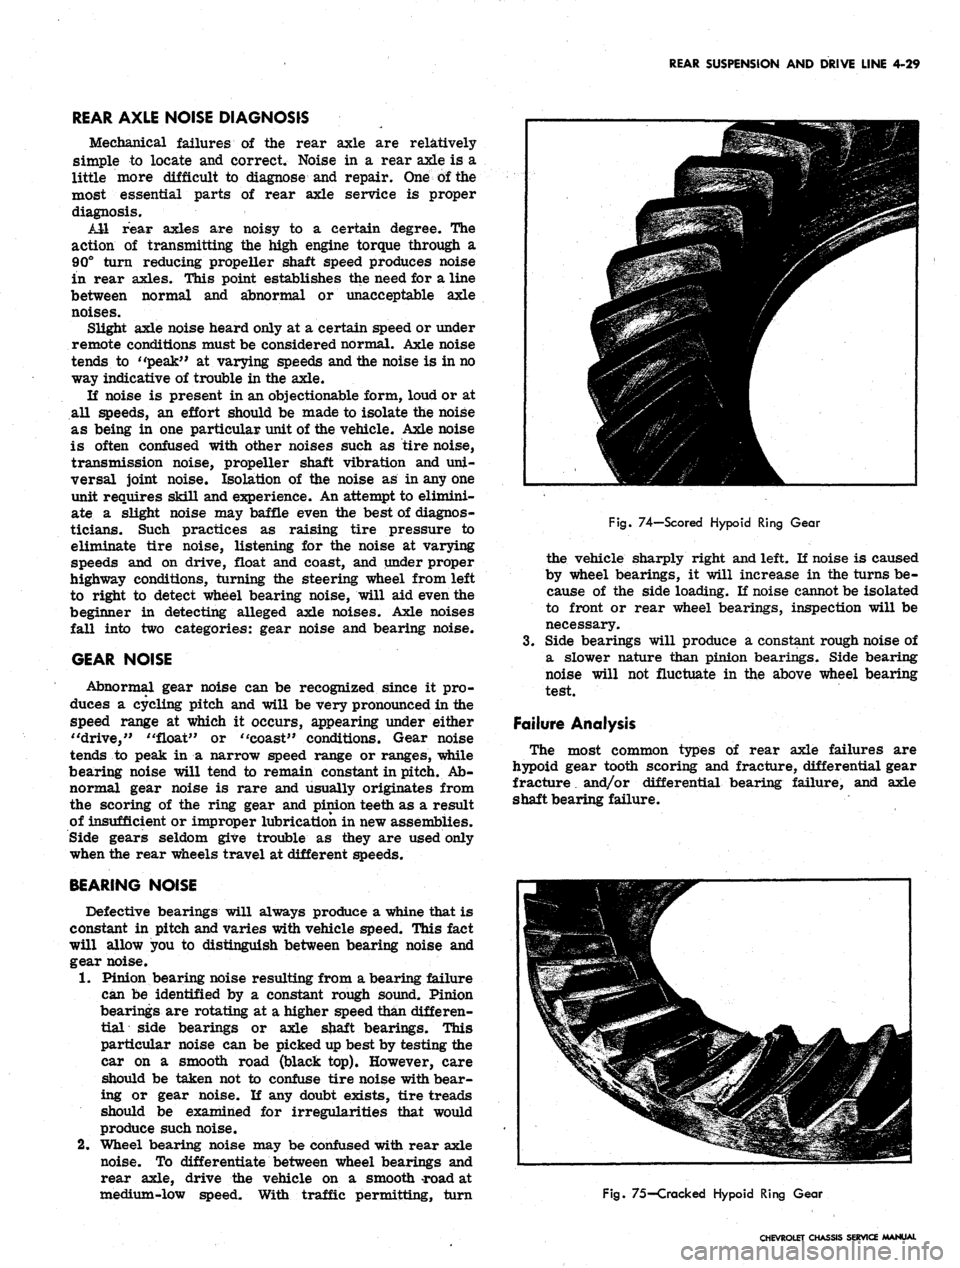 CHEVROLET CAMARO 1967 1.G Chassis Repair Manual 
REAR SUSPENSION AND DRIVE LINE 4-29

REAR AXLE NOISE DIAGNOSIS

Mechanical failures of the rear axle are relatively

simple to locate and correct. Noise in a rear axle is a

little more difficult to 